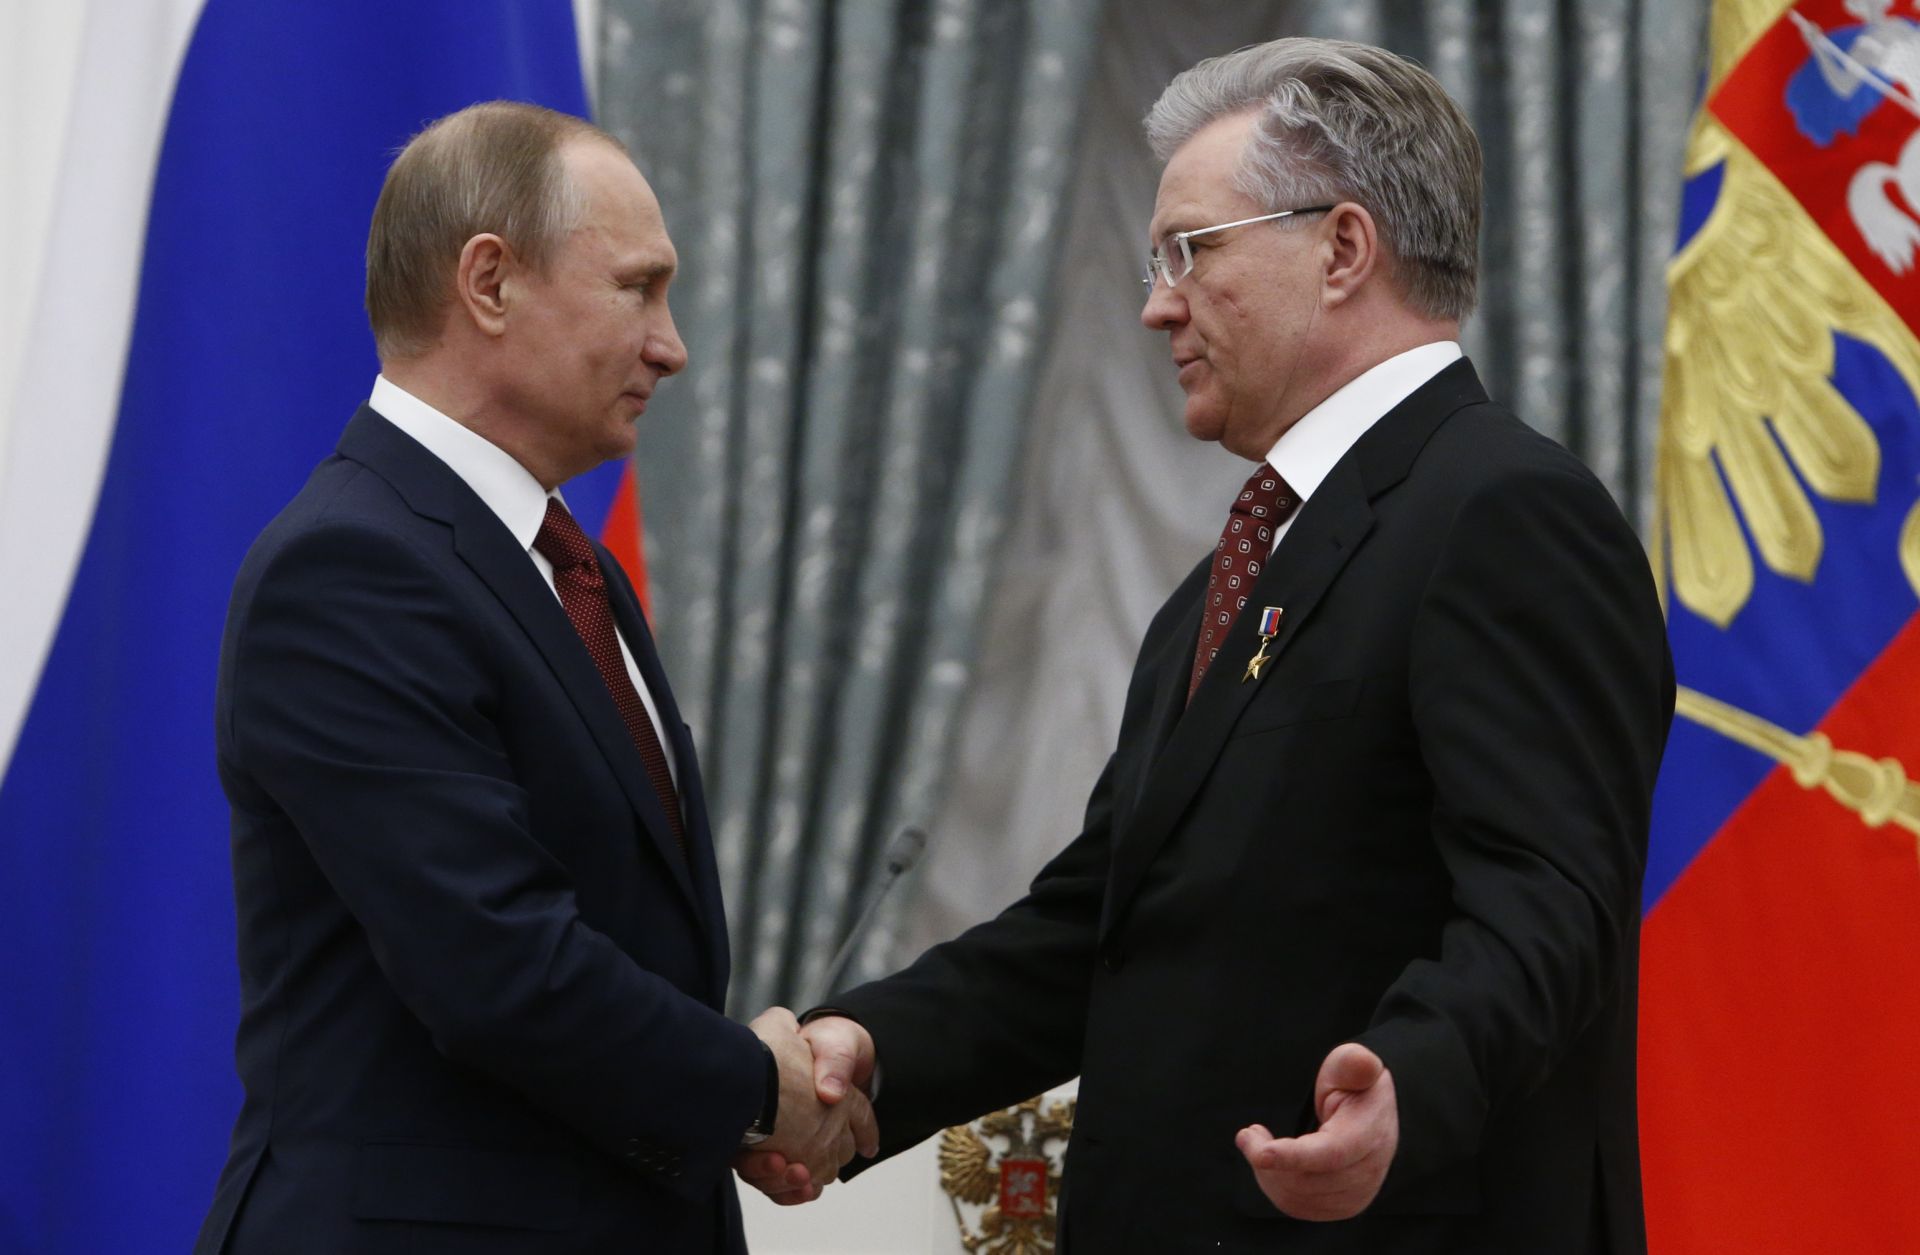 Russian President Vladimir Putin (left) shakes hands with Vladimir Bogdanov, CEO of Surgutneftegas oil and gas company, in Moscow on April 30, 2016.